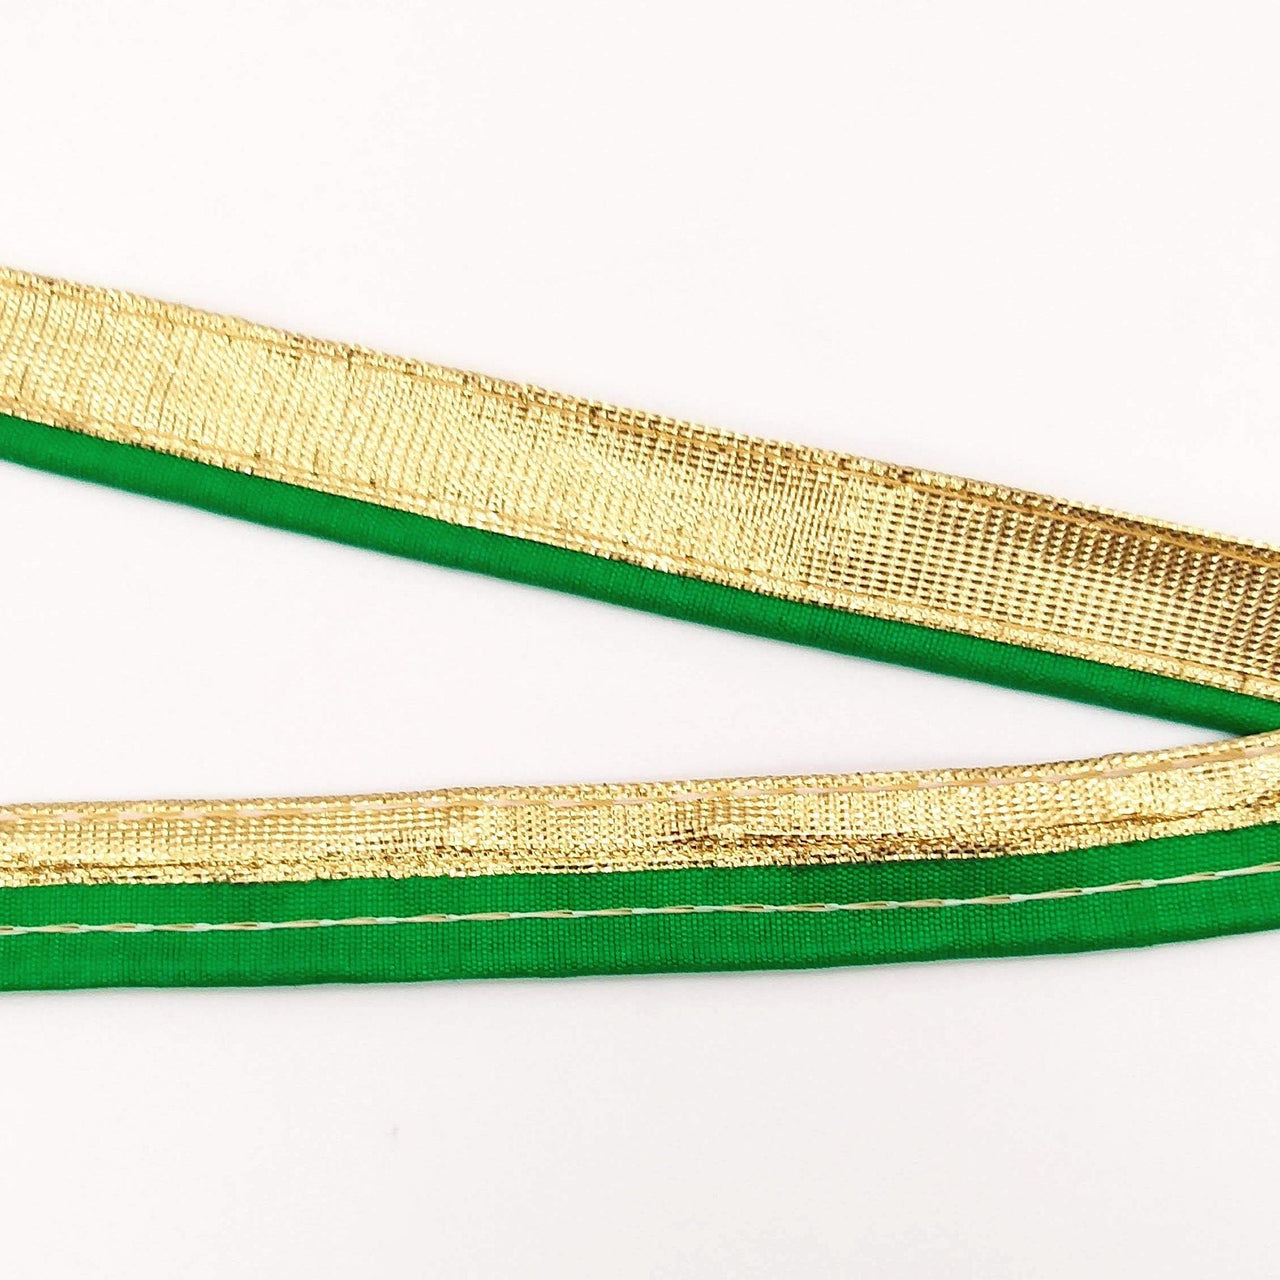 3 Yards, Flanged Insertion Gold Fabric Trim With Green Piping, 15mm Cord piping Trim Decorative Sewing Edge Trim Flanged Piping Cord